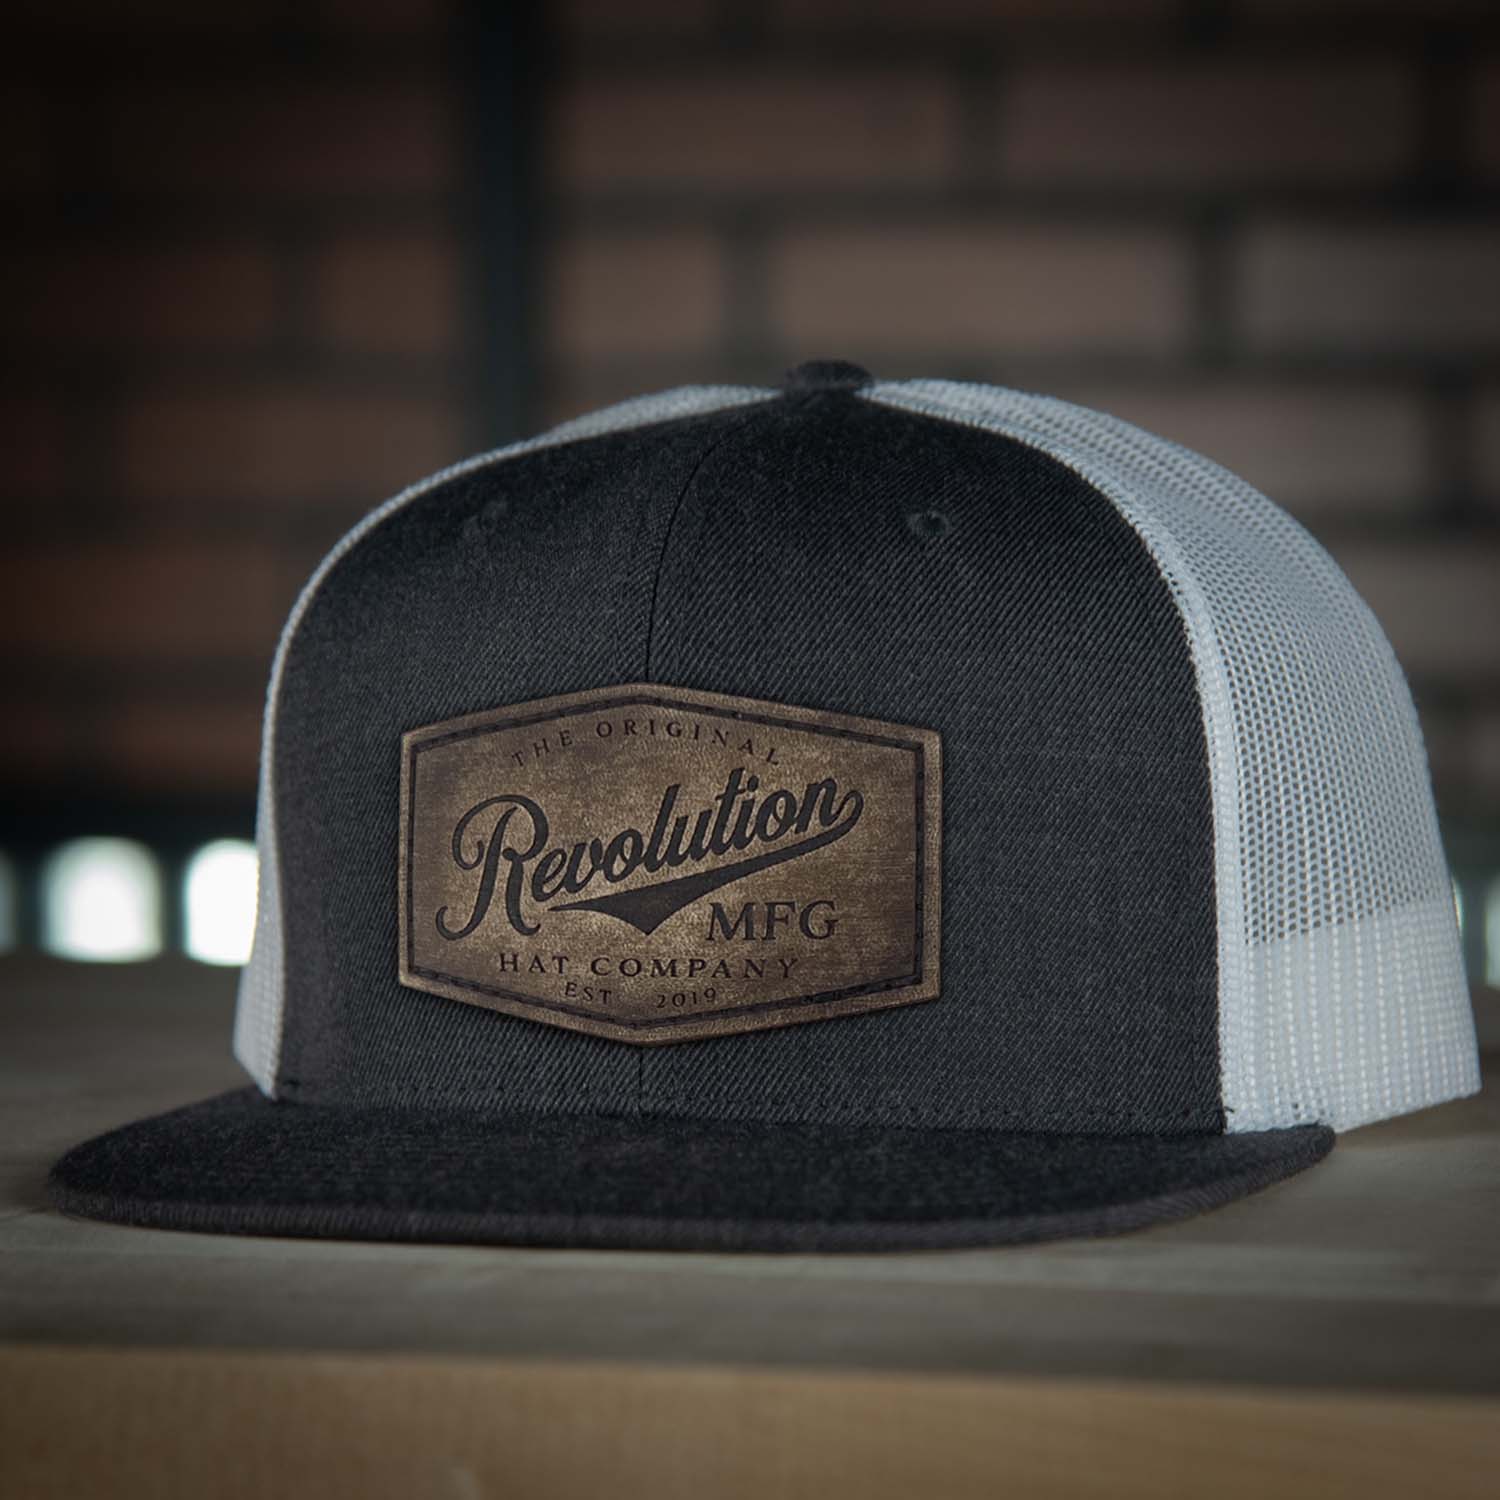 Revolution Hat Co Vintage full grain leather patch stitched on a charcoal gray and white 7 panel flat bill trucker hat